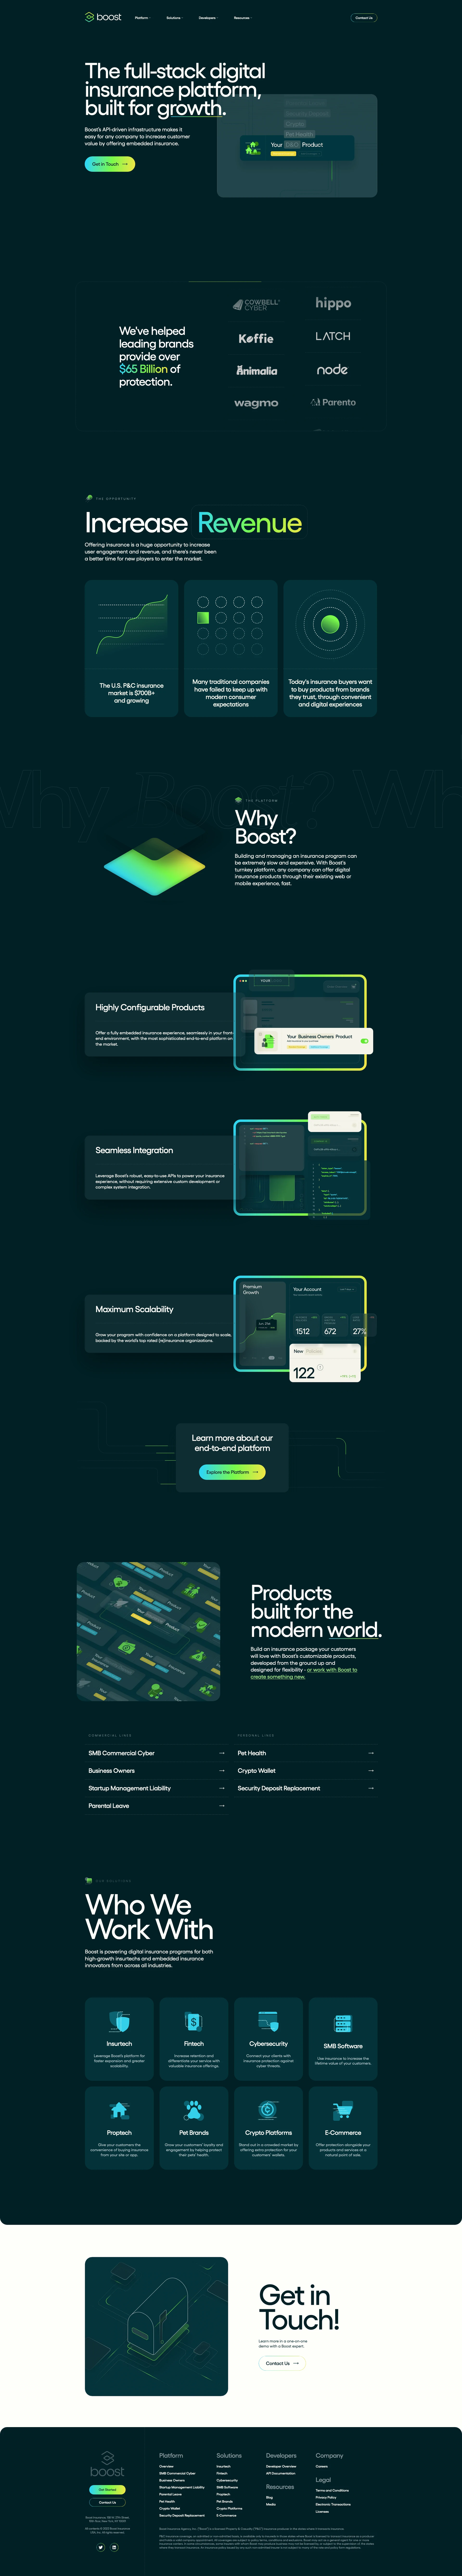 Boost Insurance Landing Page Example: The full-stack digital insurance platform, built for growth. Boost’s API-driven infrastructure makes it easy for any company to increase customer value by offering embedded insurance.